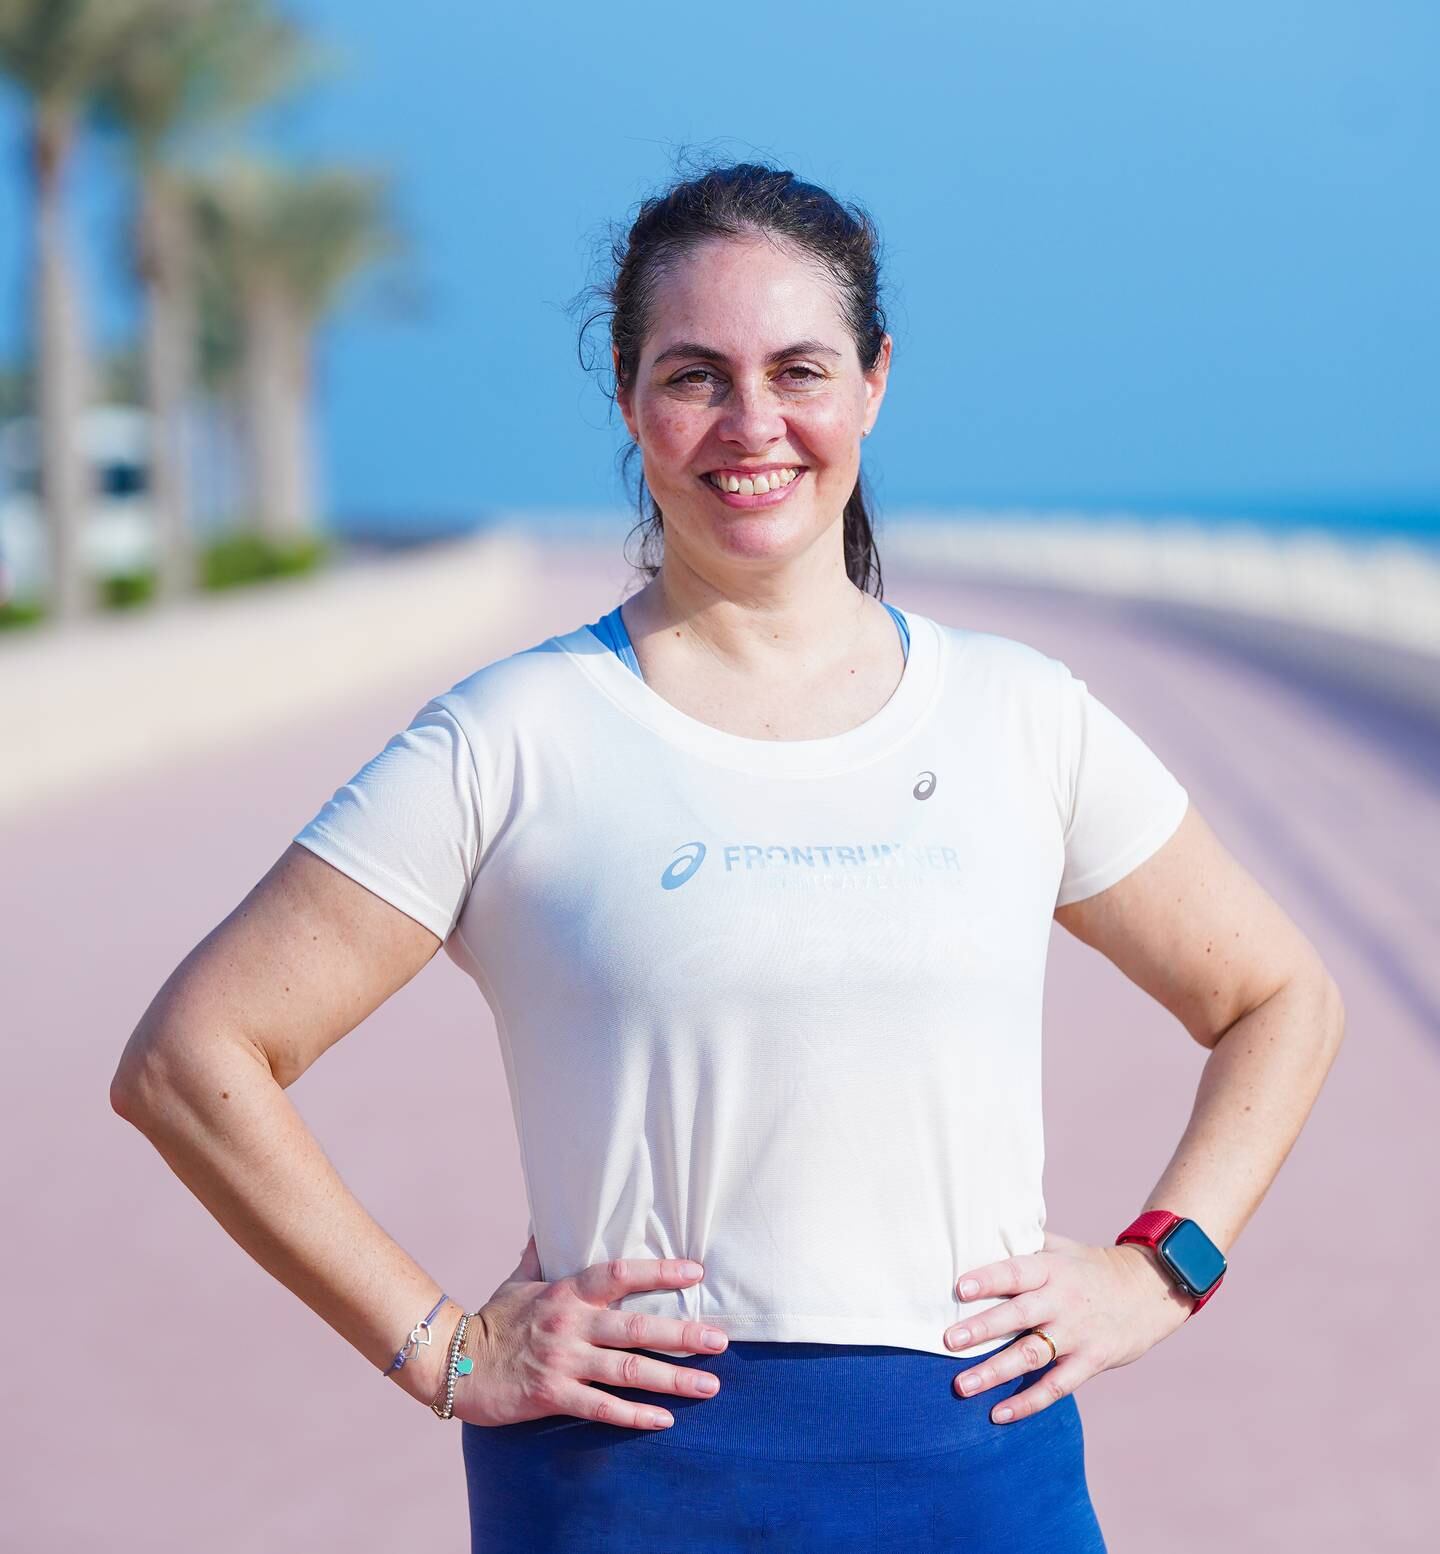 Valerie Fagerholt-Ramadan: 'No matter what life throws at me, I have a tried-and-tested way to keep myself strong'. Photo: Asics